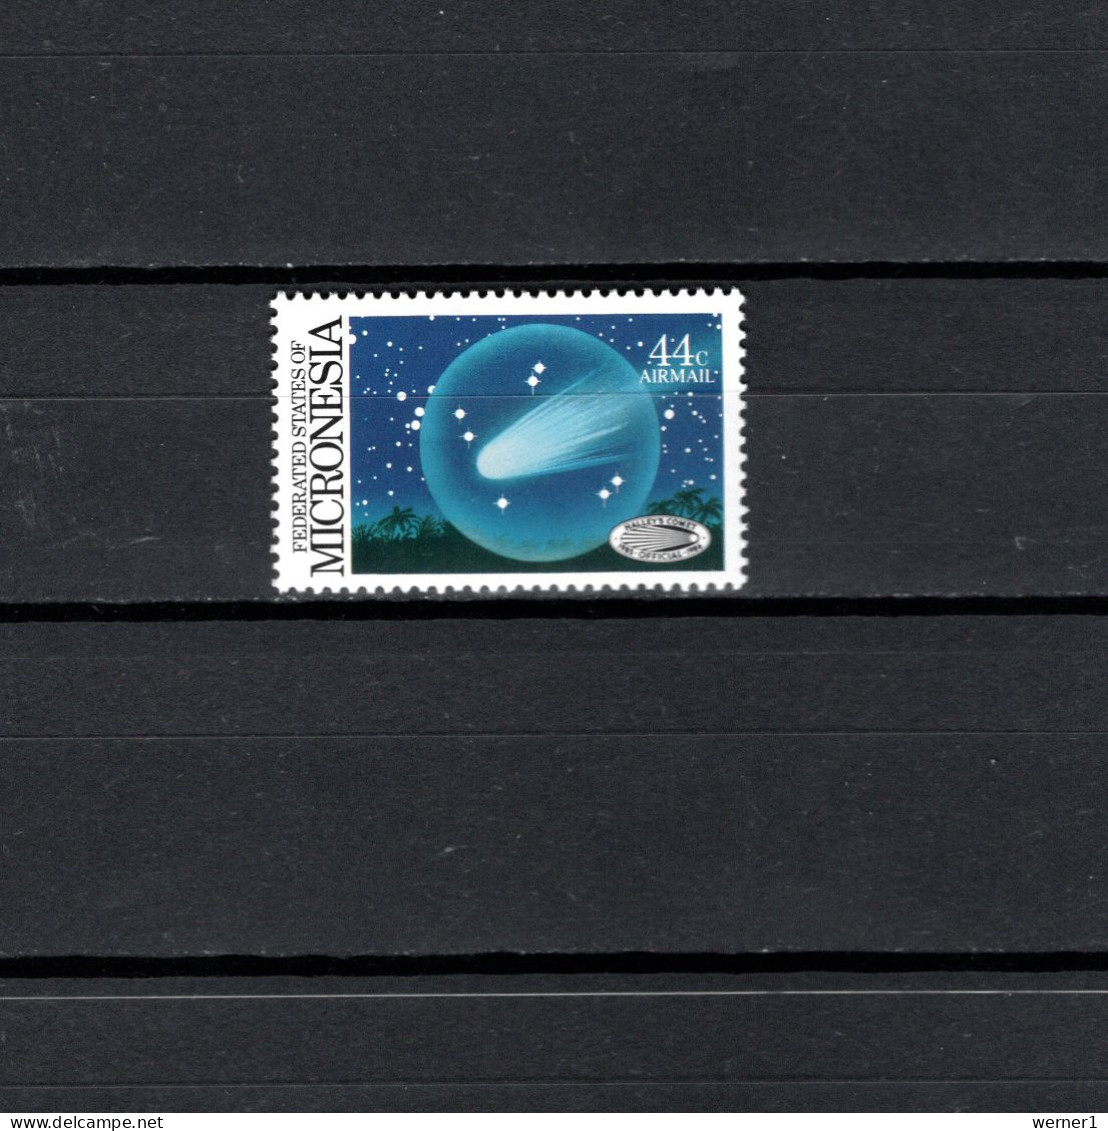 Micronesia 1986 Space, Halley's Comet Stamp MNH - Océanie